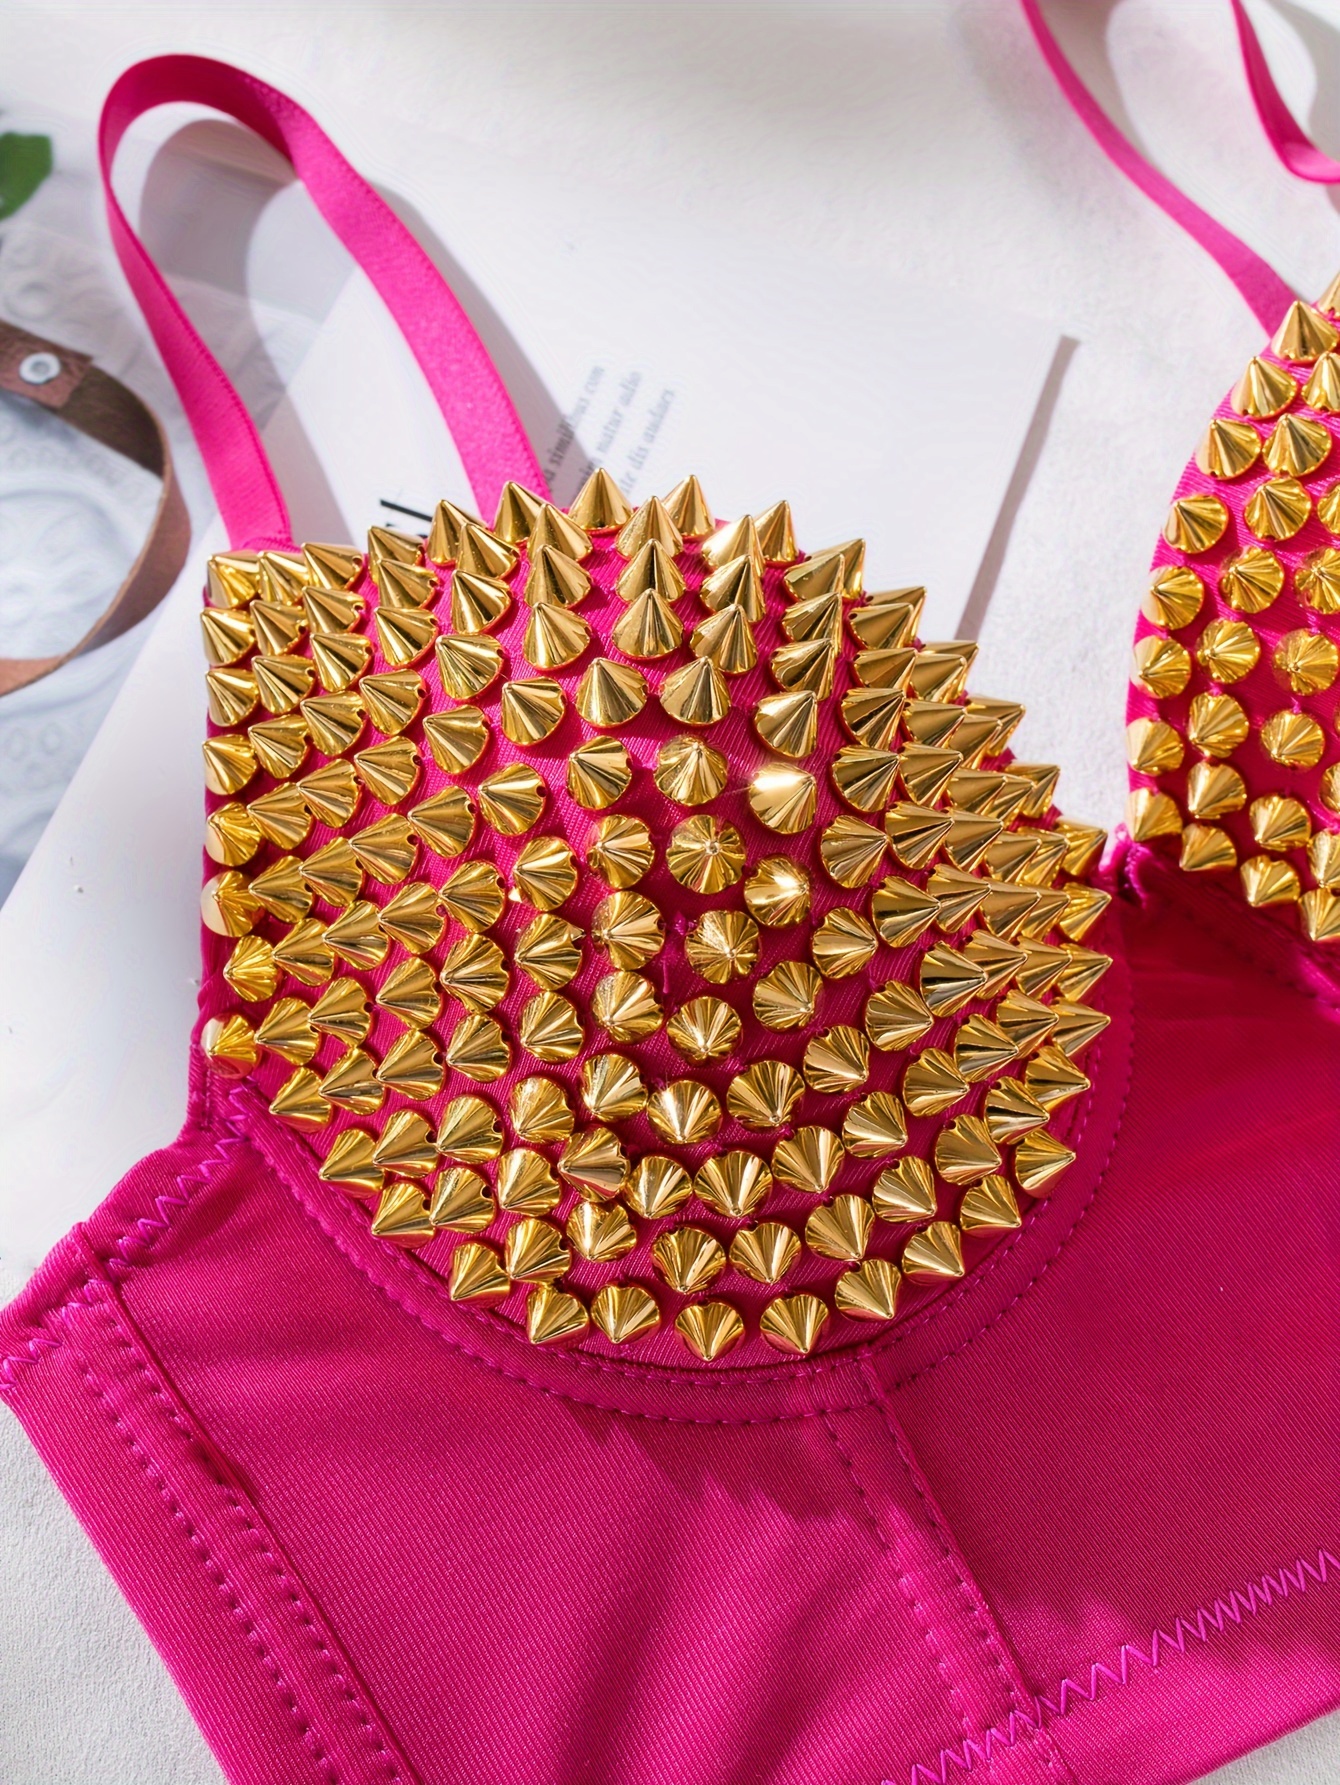 Spiked bra: buy sexy studded bra for ladies